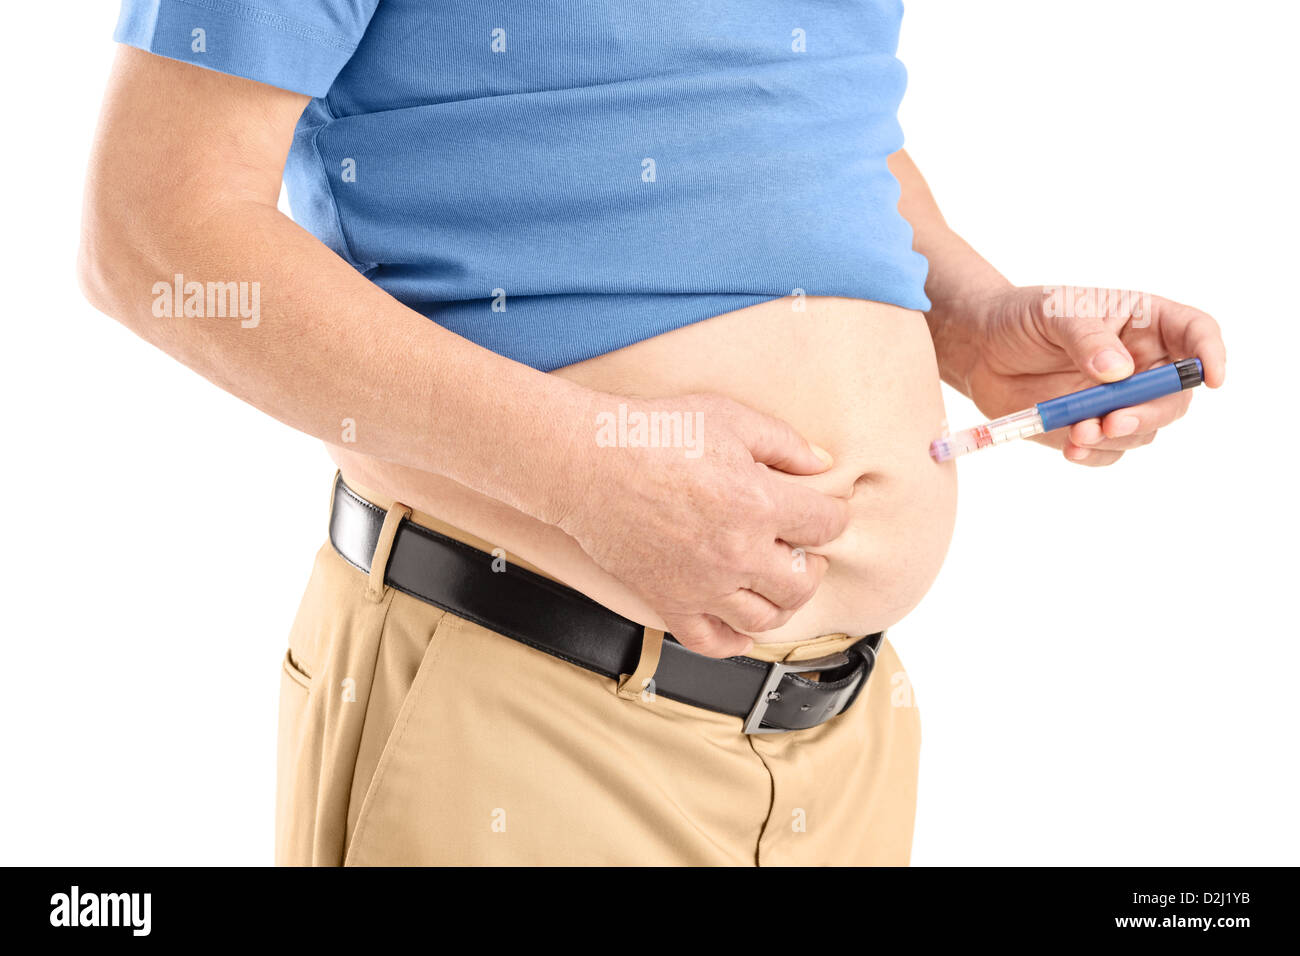 Mature man injecting insulin in his abdomen isolated on white background Stock Photo